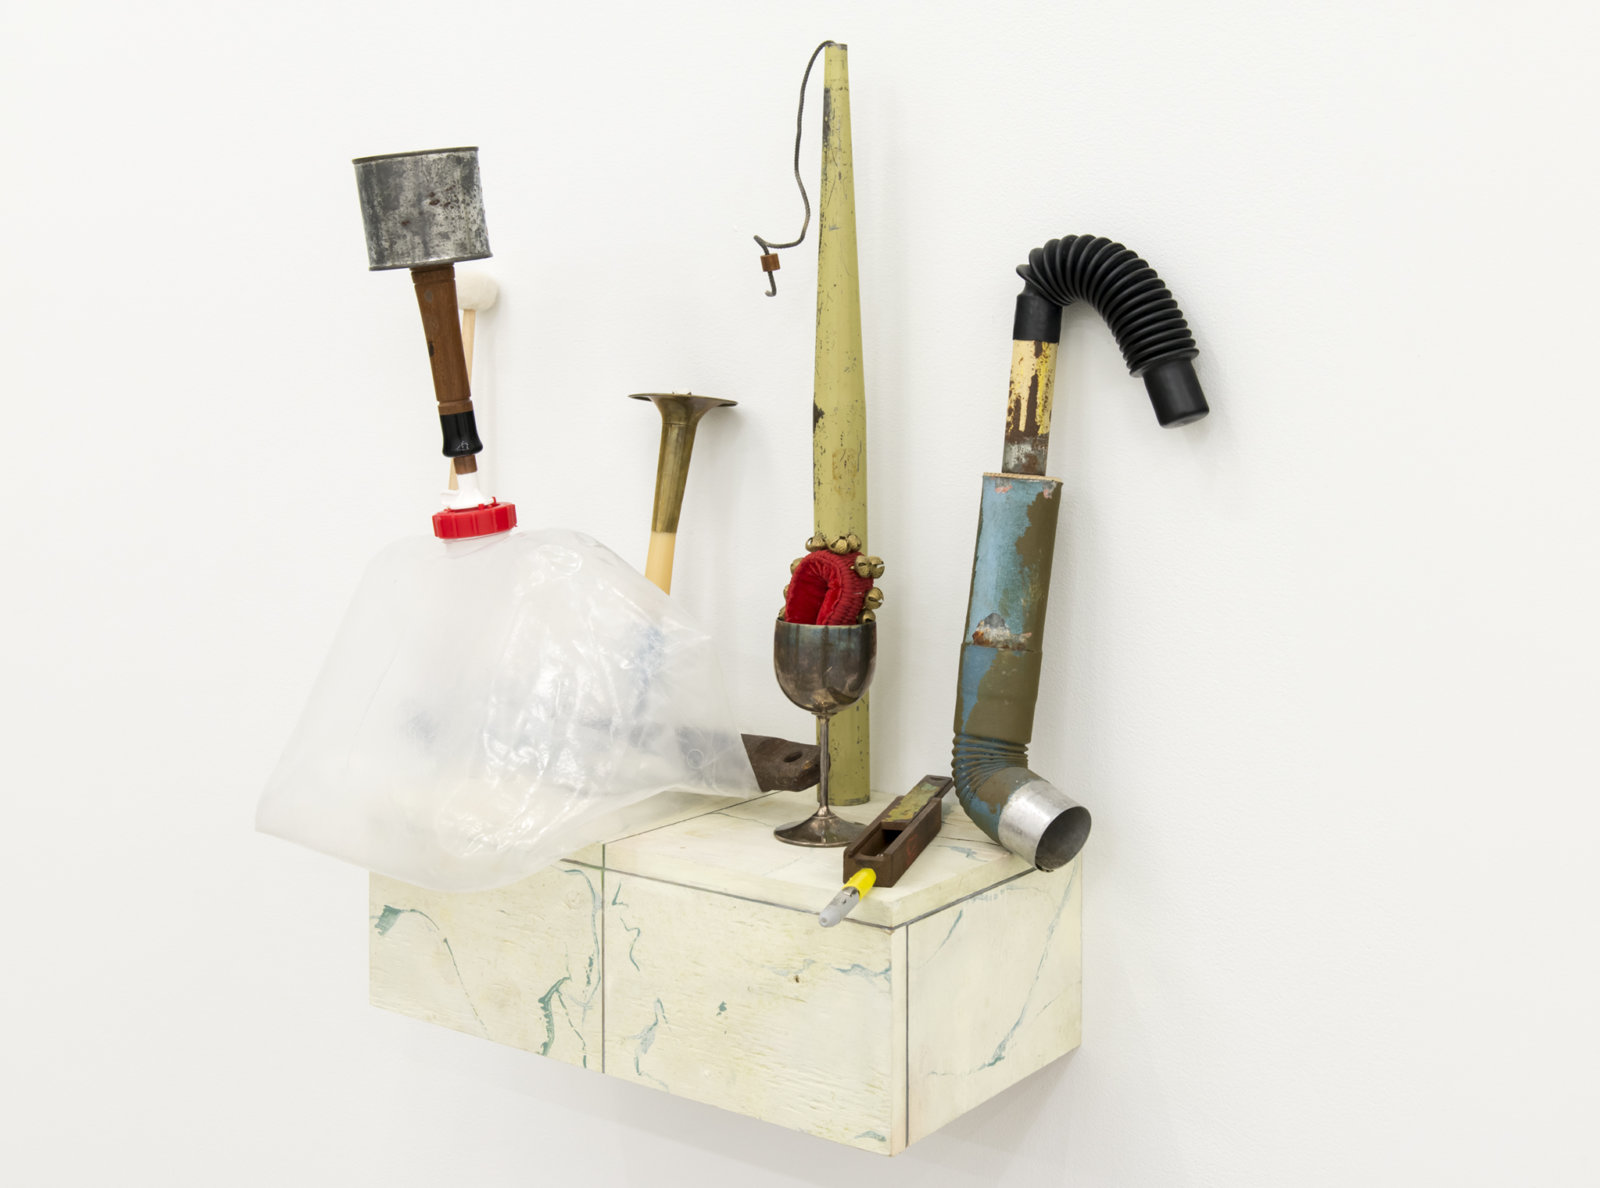 Ashes Withyman, Compass, Furnas, Altar, River, Cetus, Musca, Cup, 2017–2018, water jug, sash weight, mallet, bells, brass horn, hunting call parts, drainpipe, chair leg, silver cup, marker, electrical parts, painted plywood, 29 x 25 x 12 in. (72 x 64 x 31 cm)